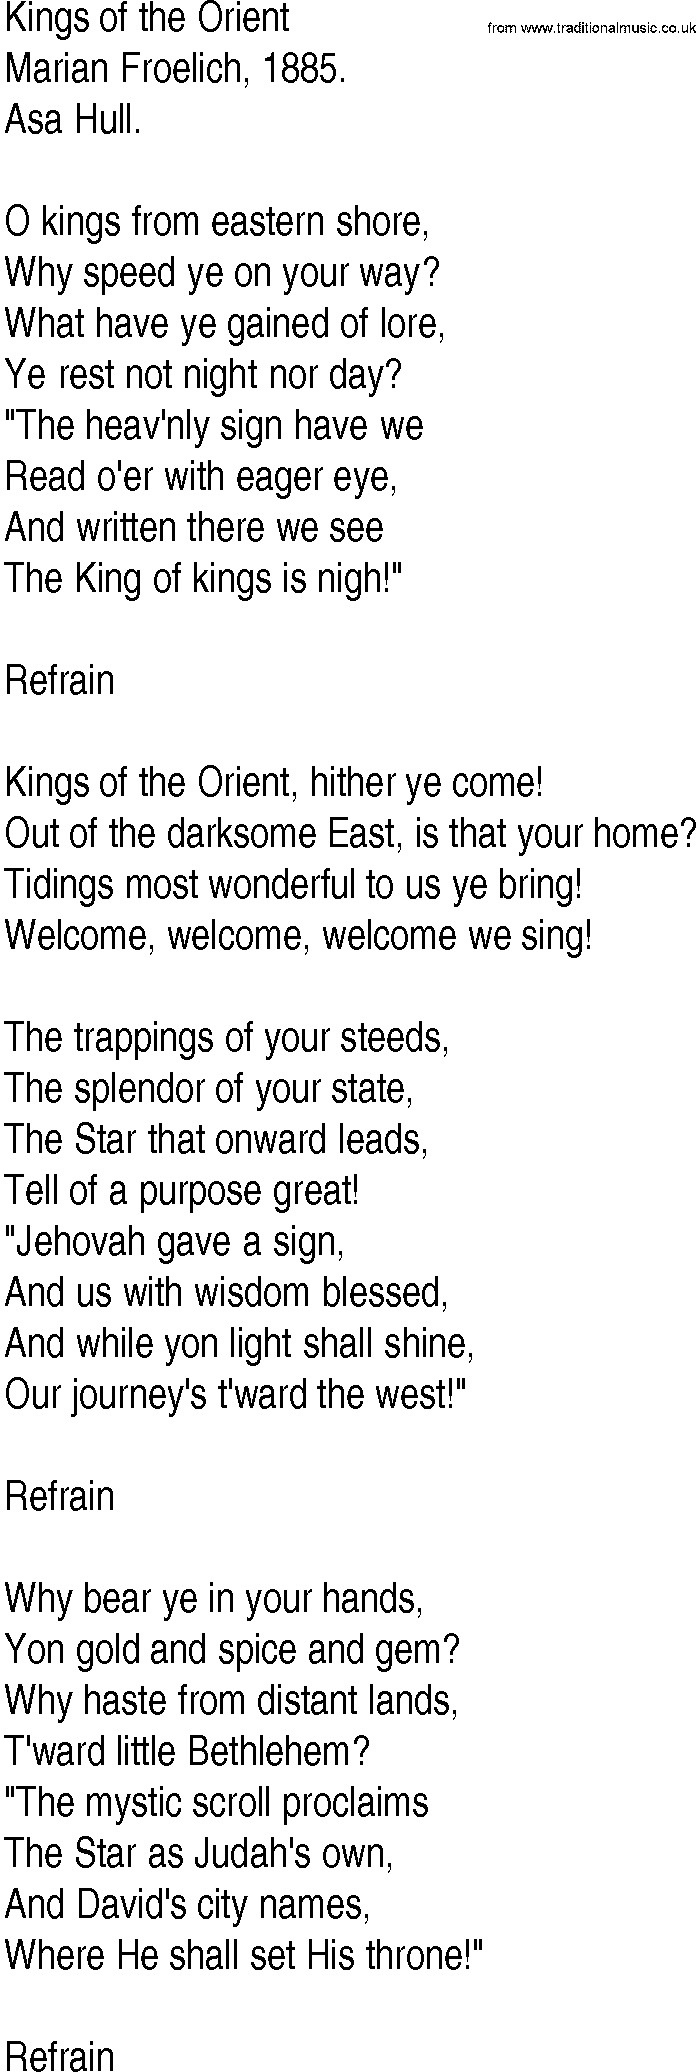 Hymn and Gospel Song: Kings of the Orient by Marian Froelich lyrics